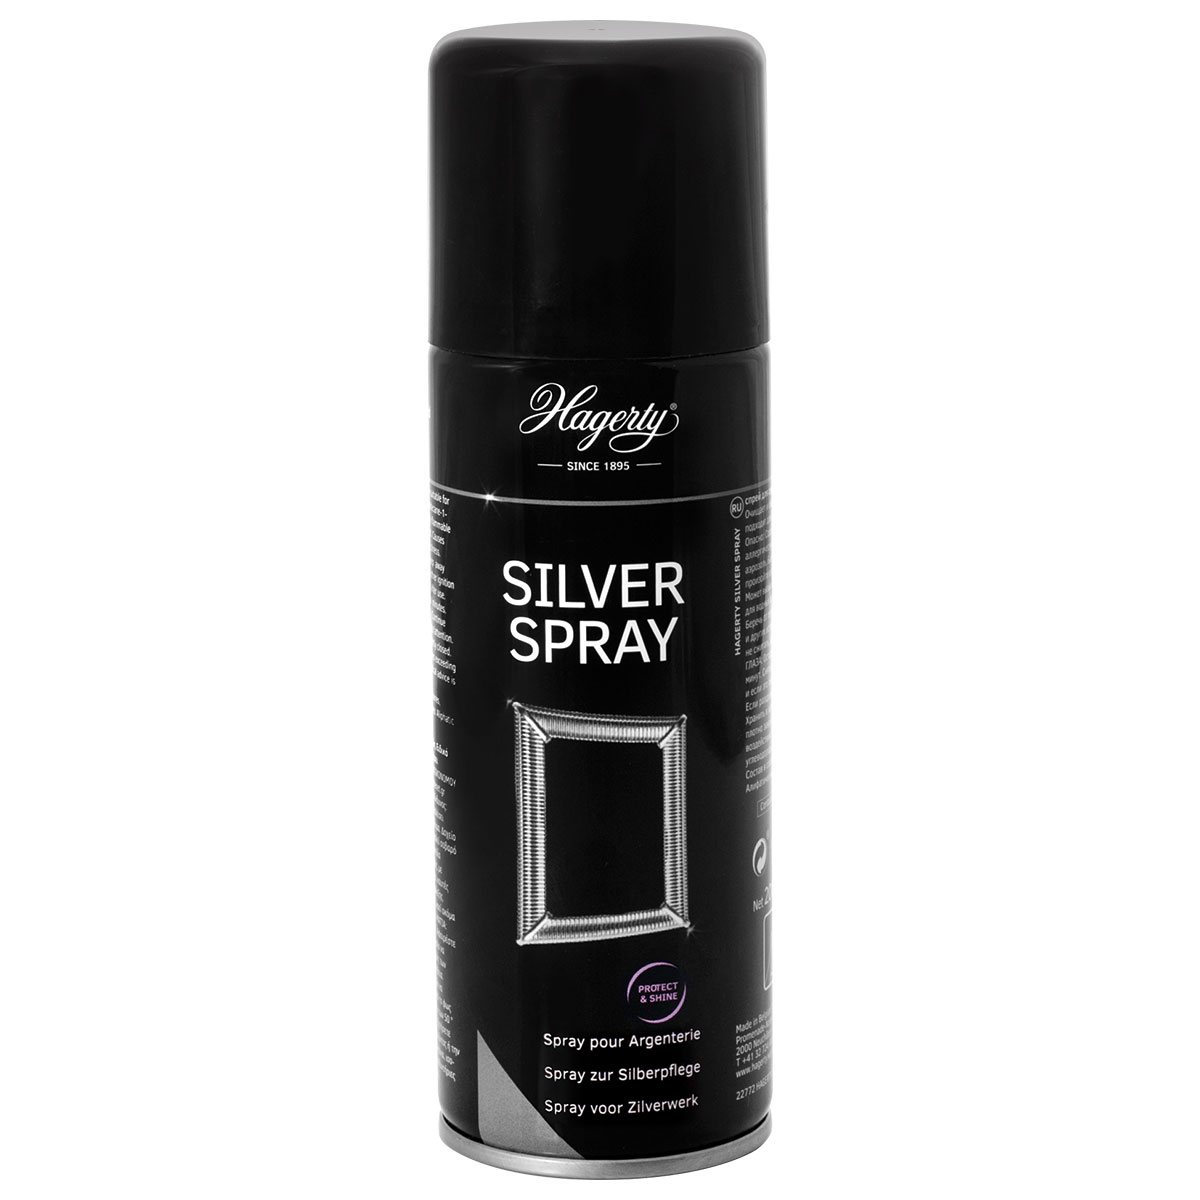 Hagerty Silver Spray, silver care product, 200 ml